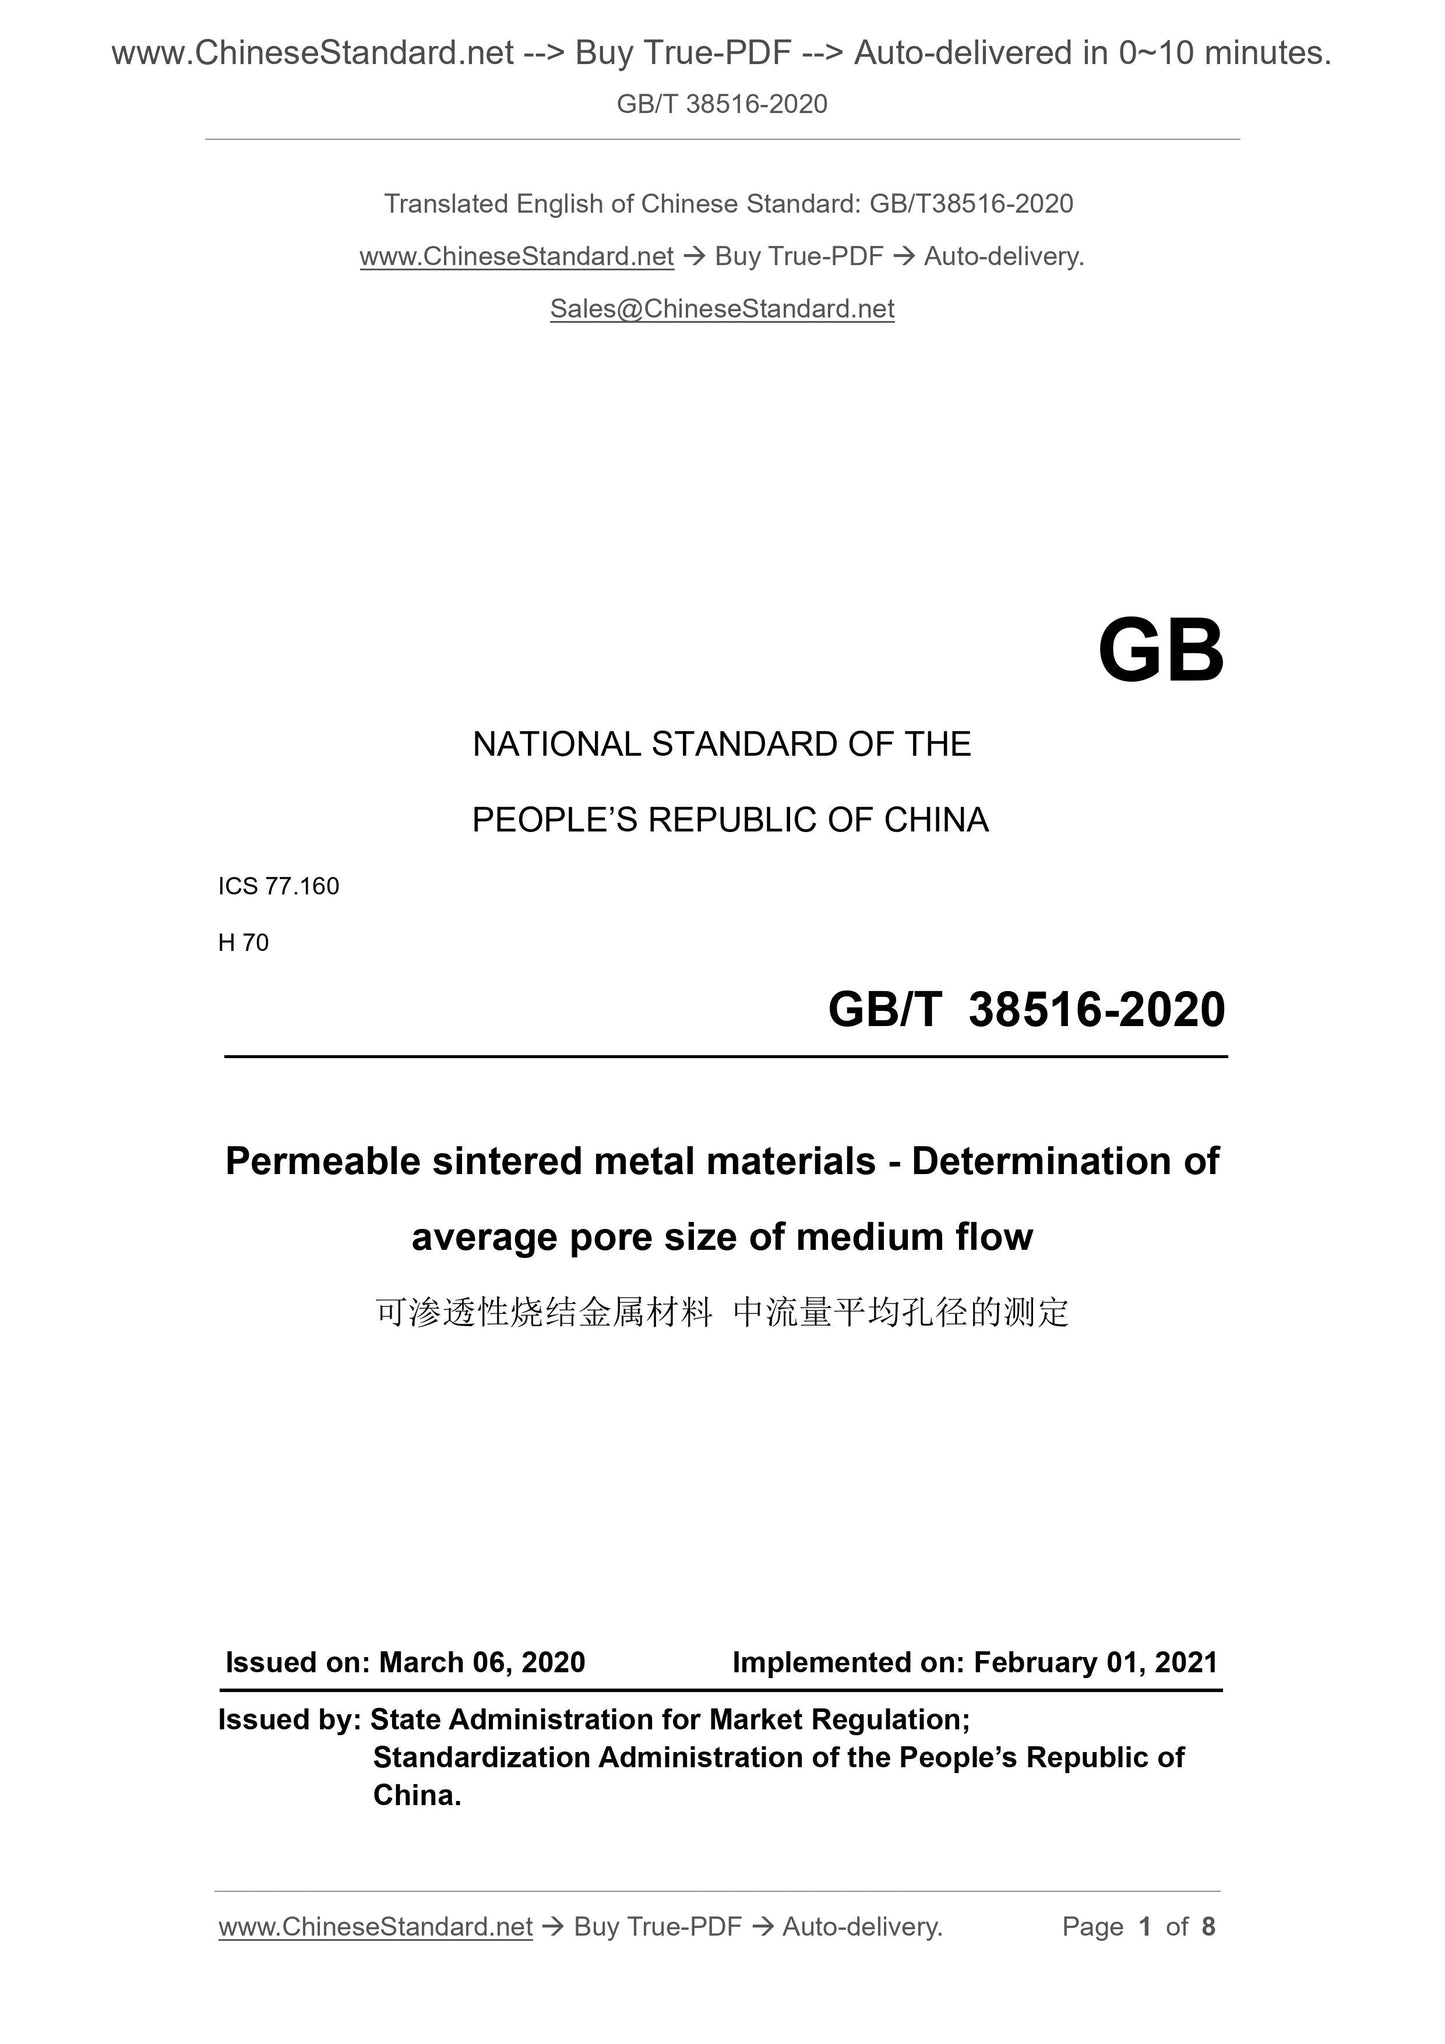 GB/T 38516-2020 Page 1